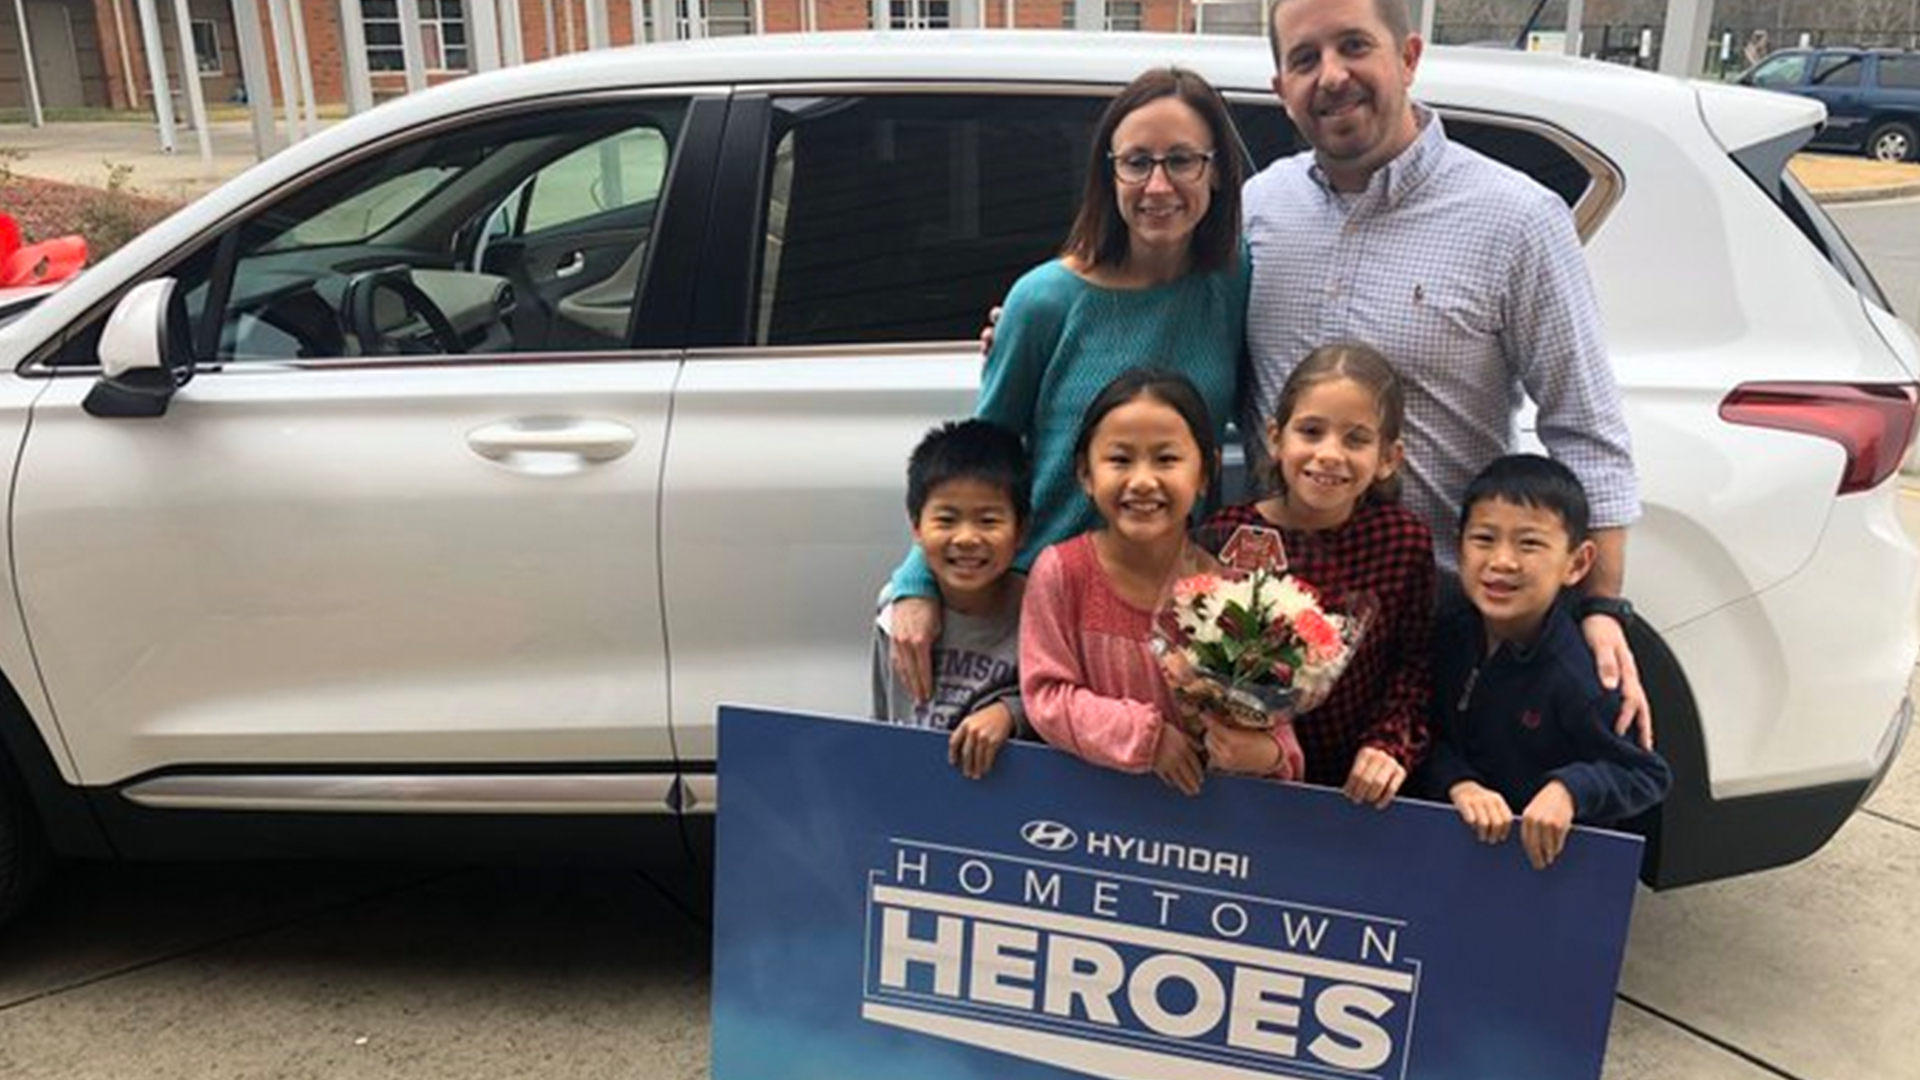 Beth York was awarded a Hyundai for her work at home and at school, where she teaches in Rock Hill.